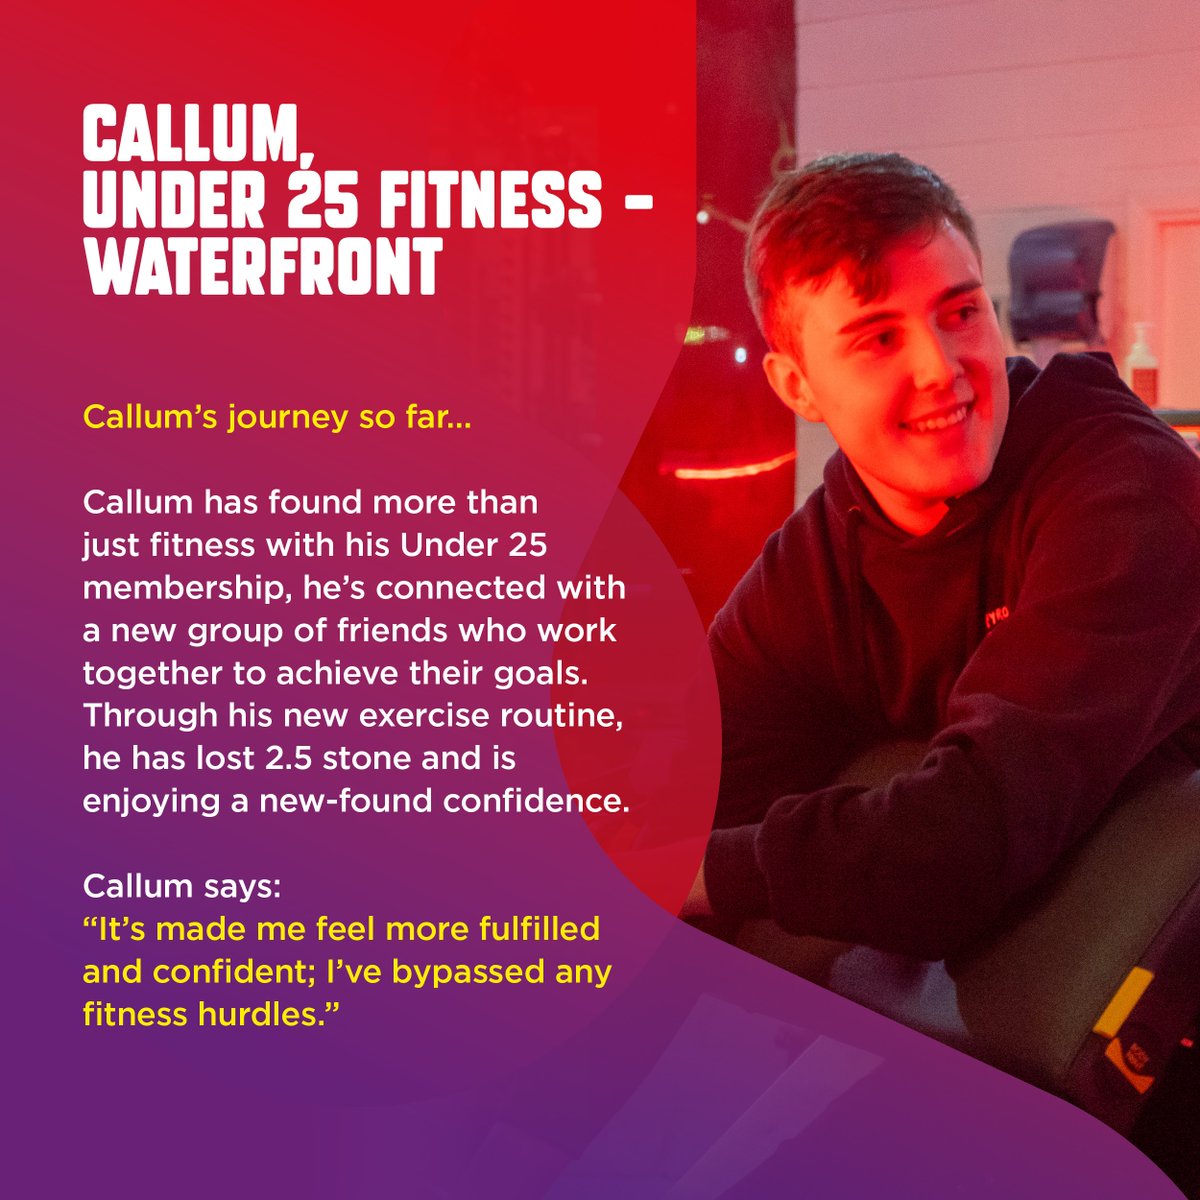 Callum has found more than just fitness with his Under 25 membership, he’s connected with a new group of friends who work together to achieve their goals. Through this, he has lost 2.5 stone and is enjoying a new-found confidence. Find out more 👇 ilgetactive.com